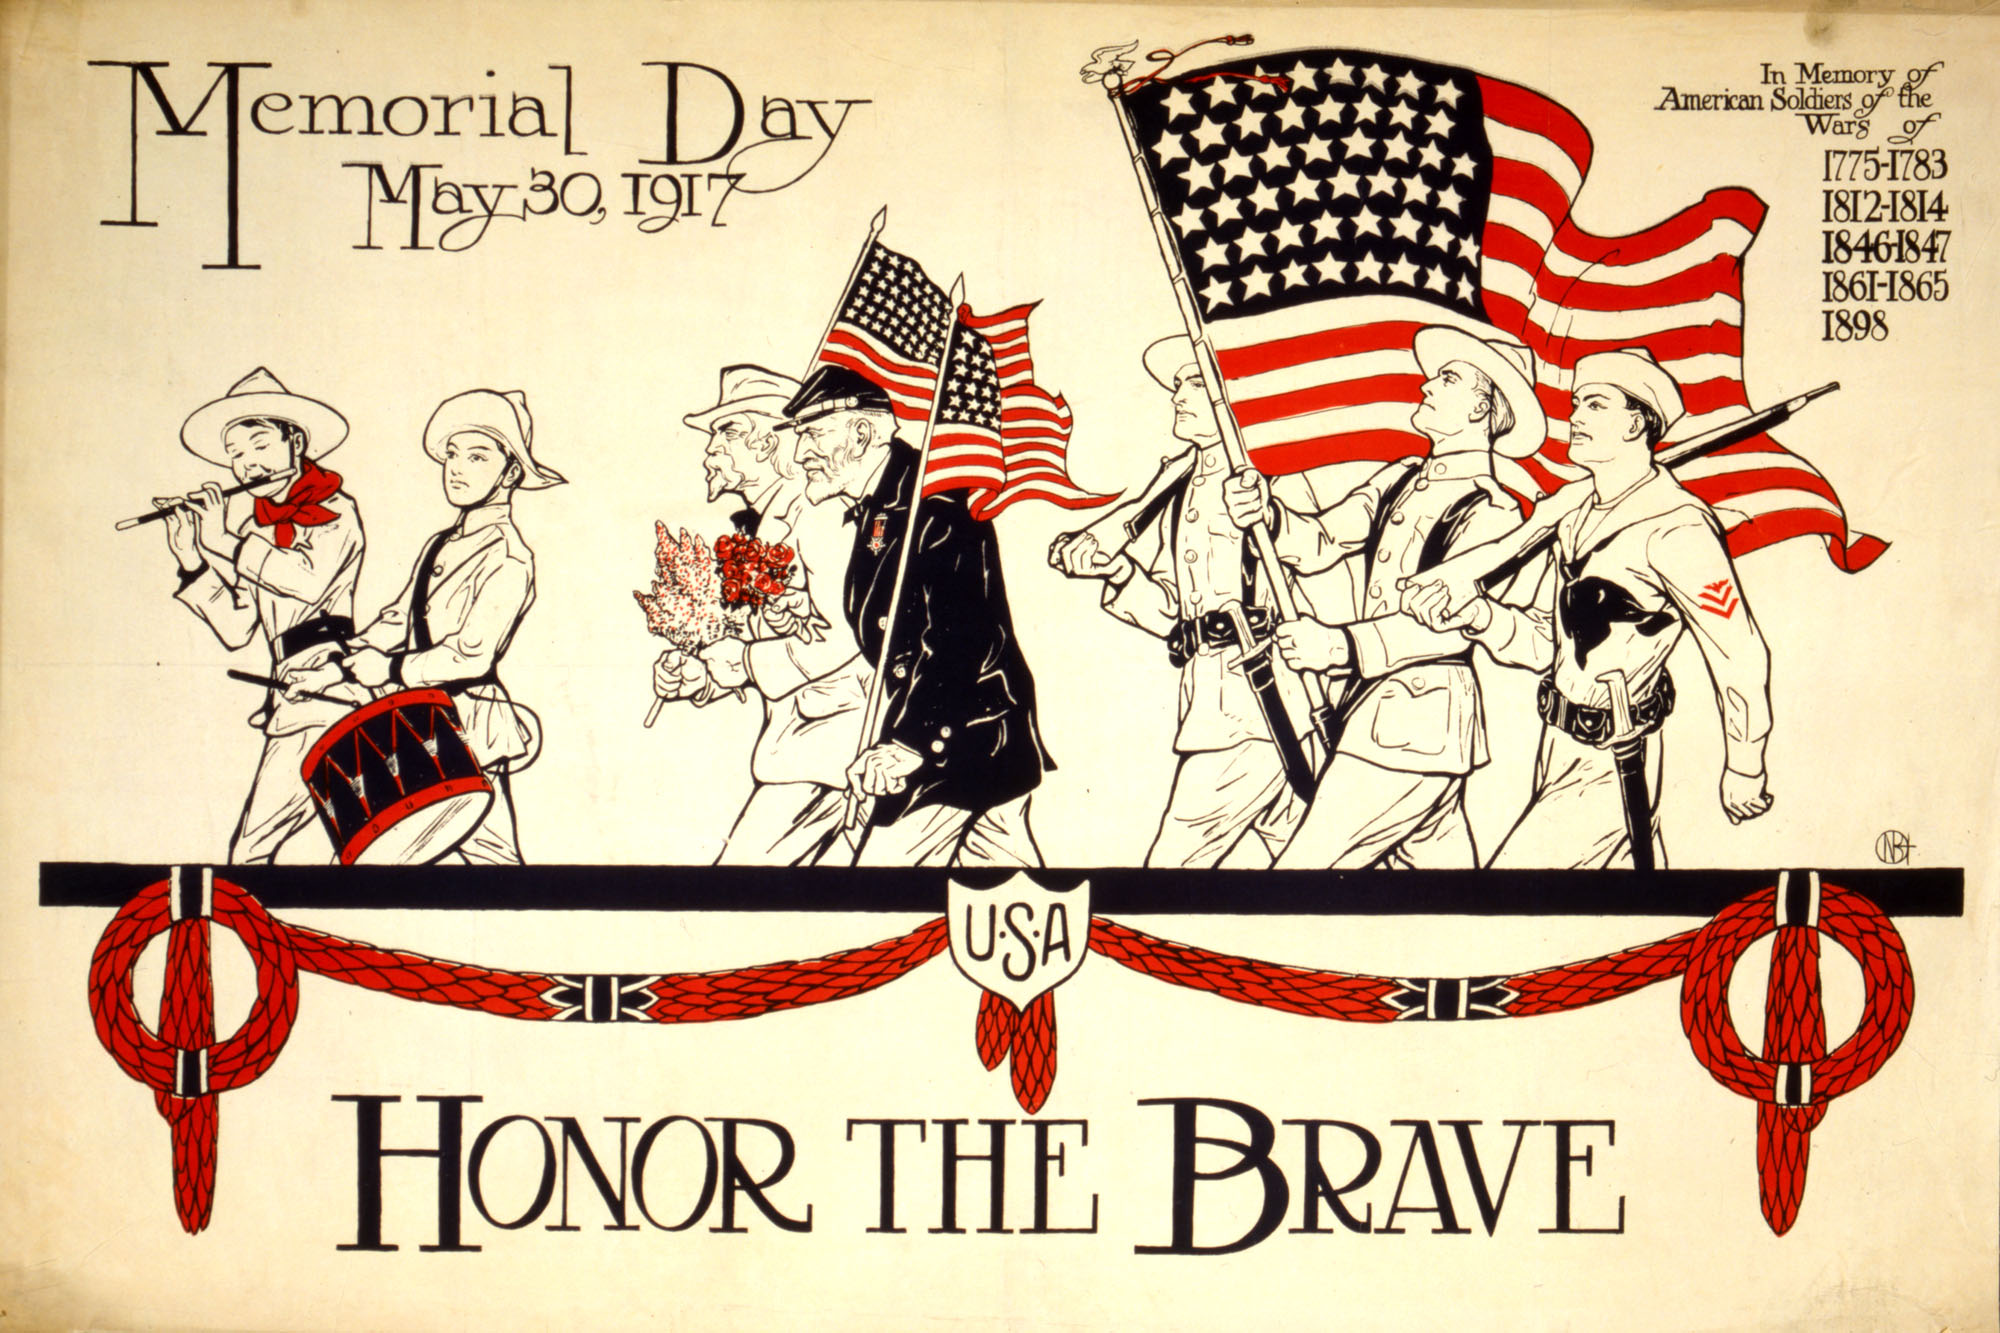 Honor the brave Memorial Day, May 30, 1917.